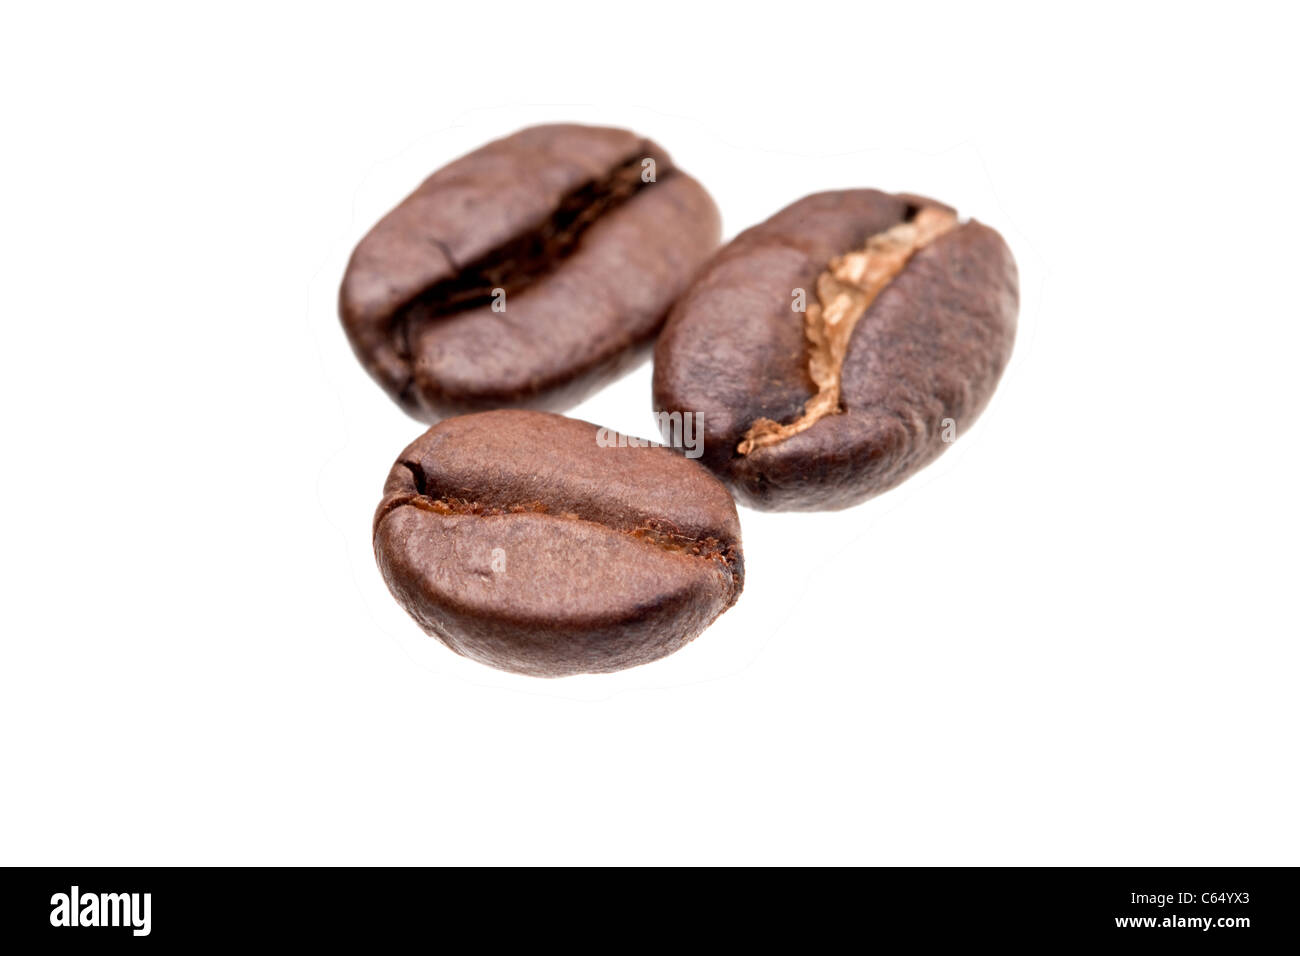 Coffee beans, close up photograph taken in studio Stock Photo